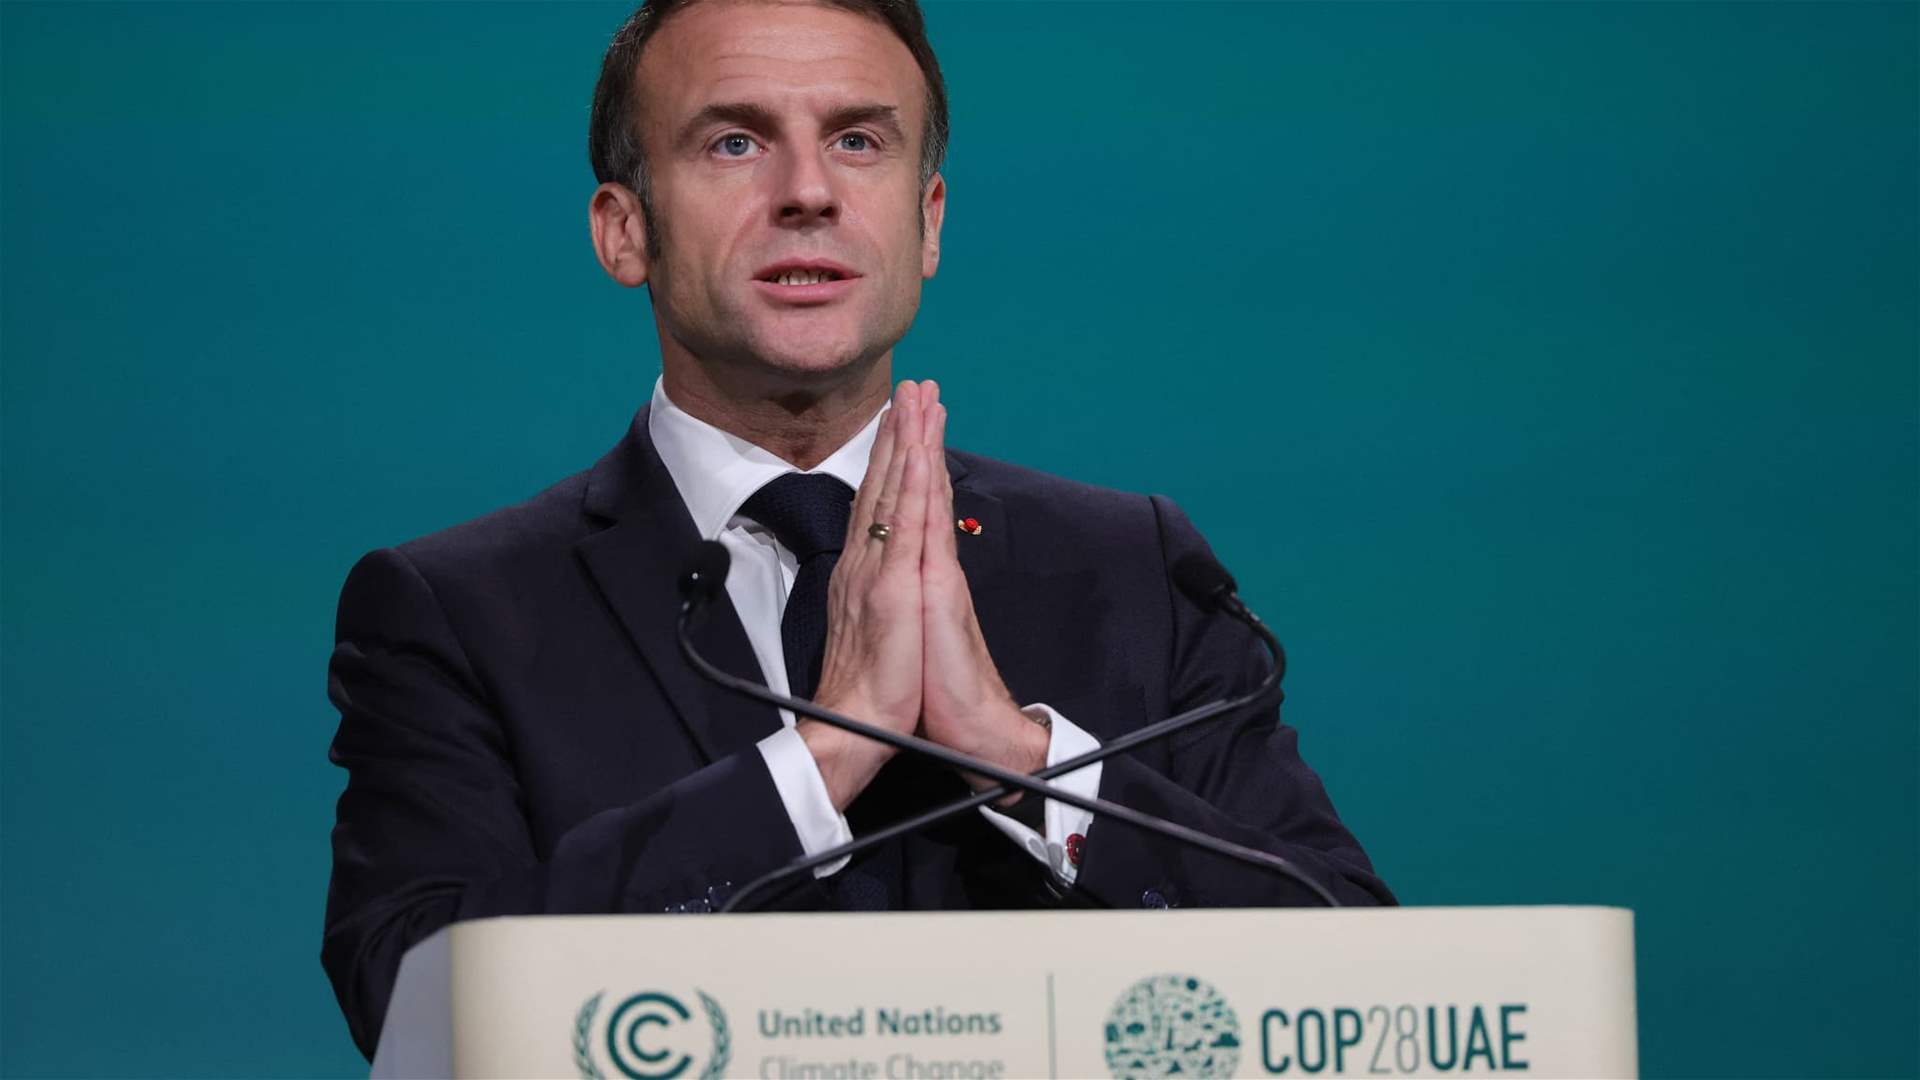 At COP28, Macron calls on G7 nations to stop using coal before 2030 